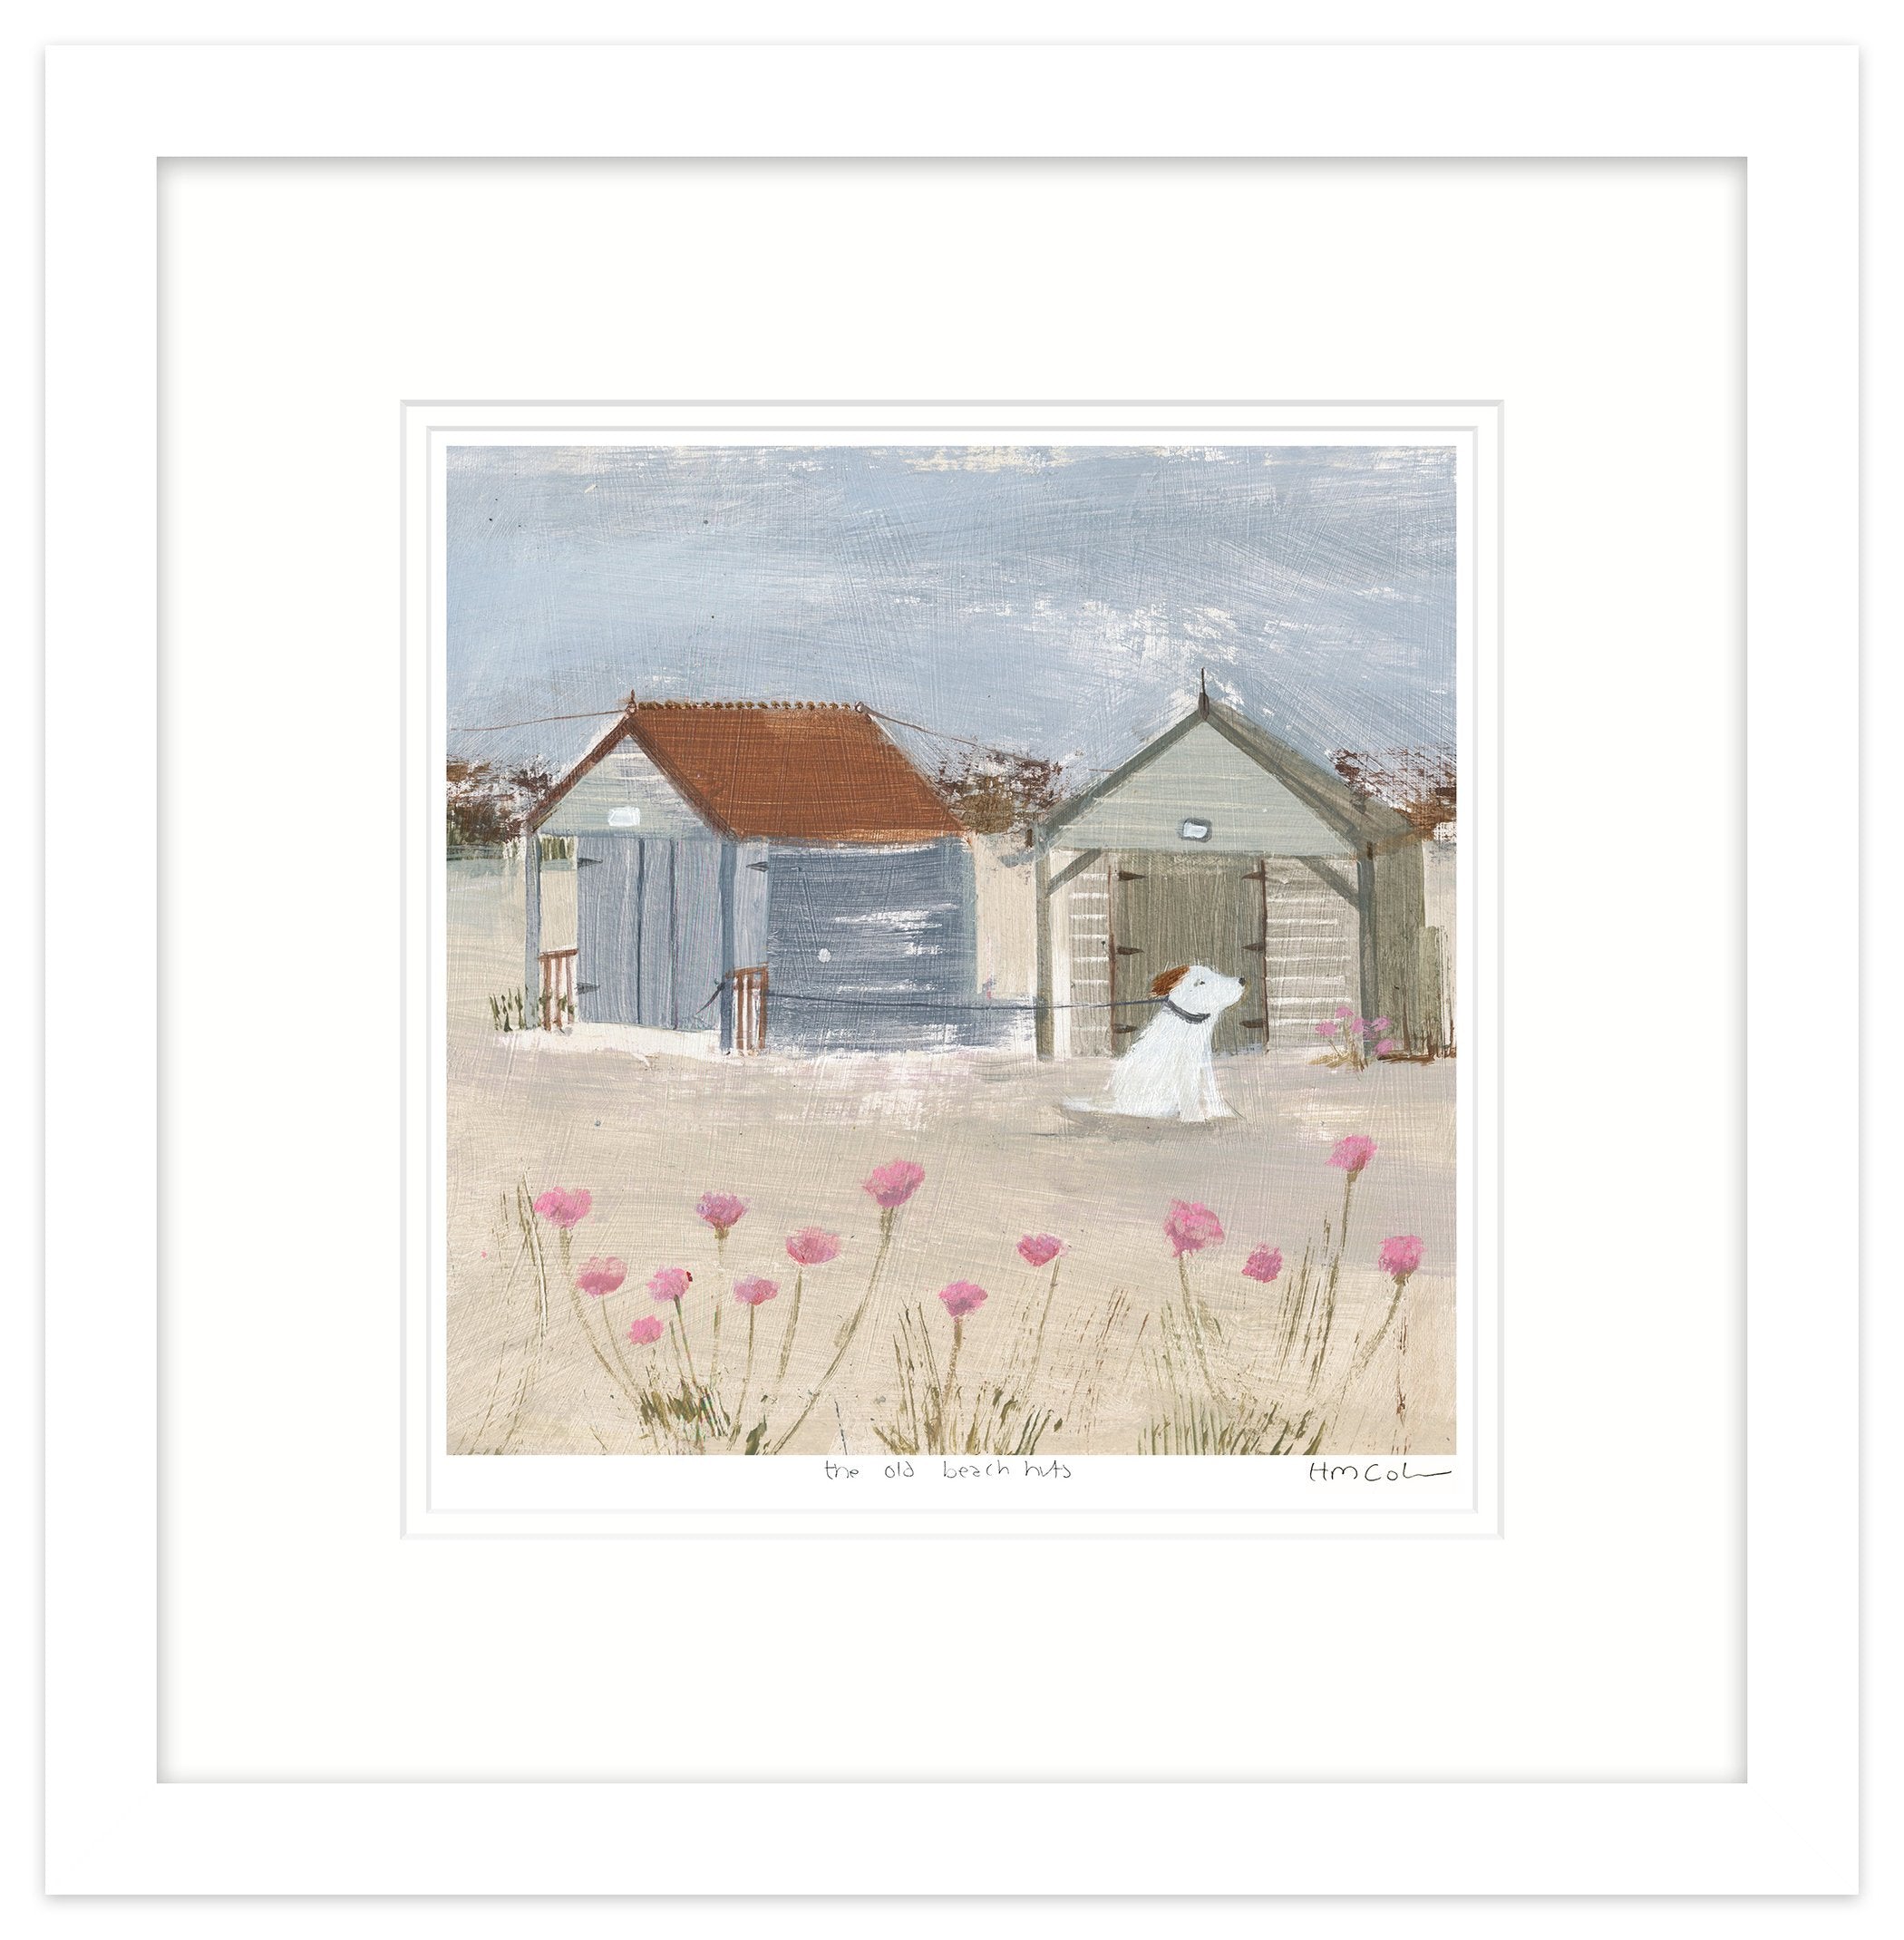 The Old Beach Huts Small Framed Print